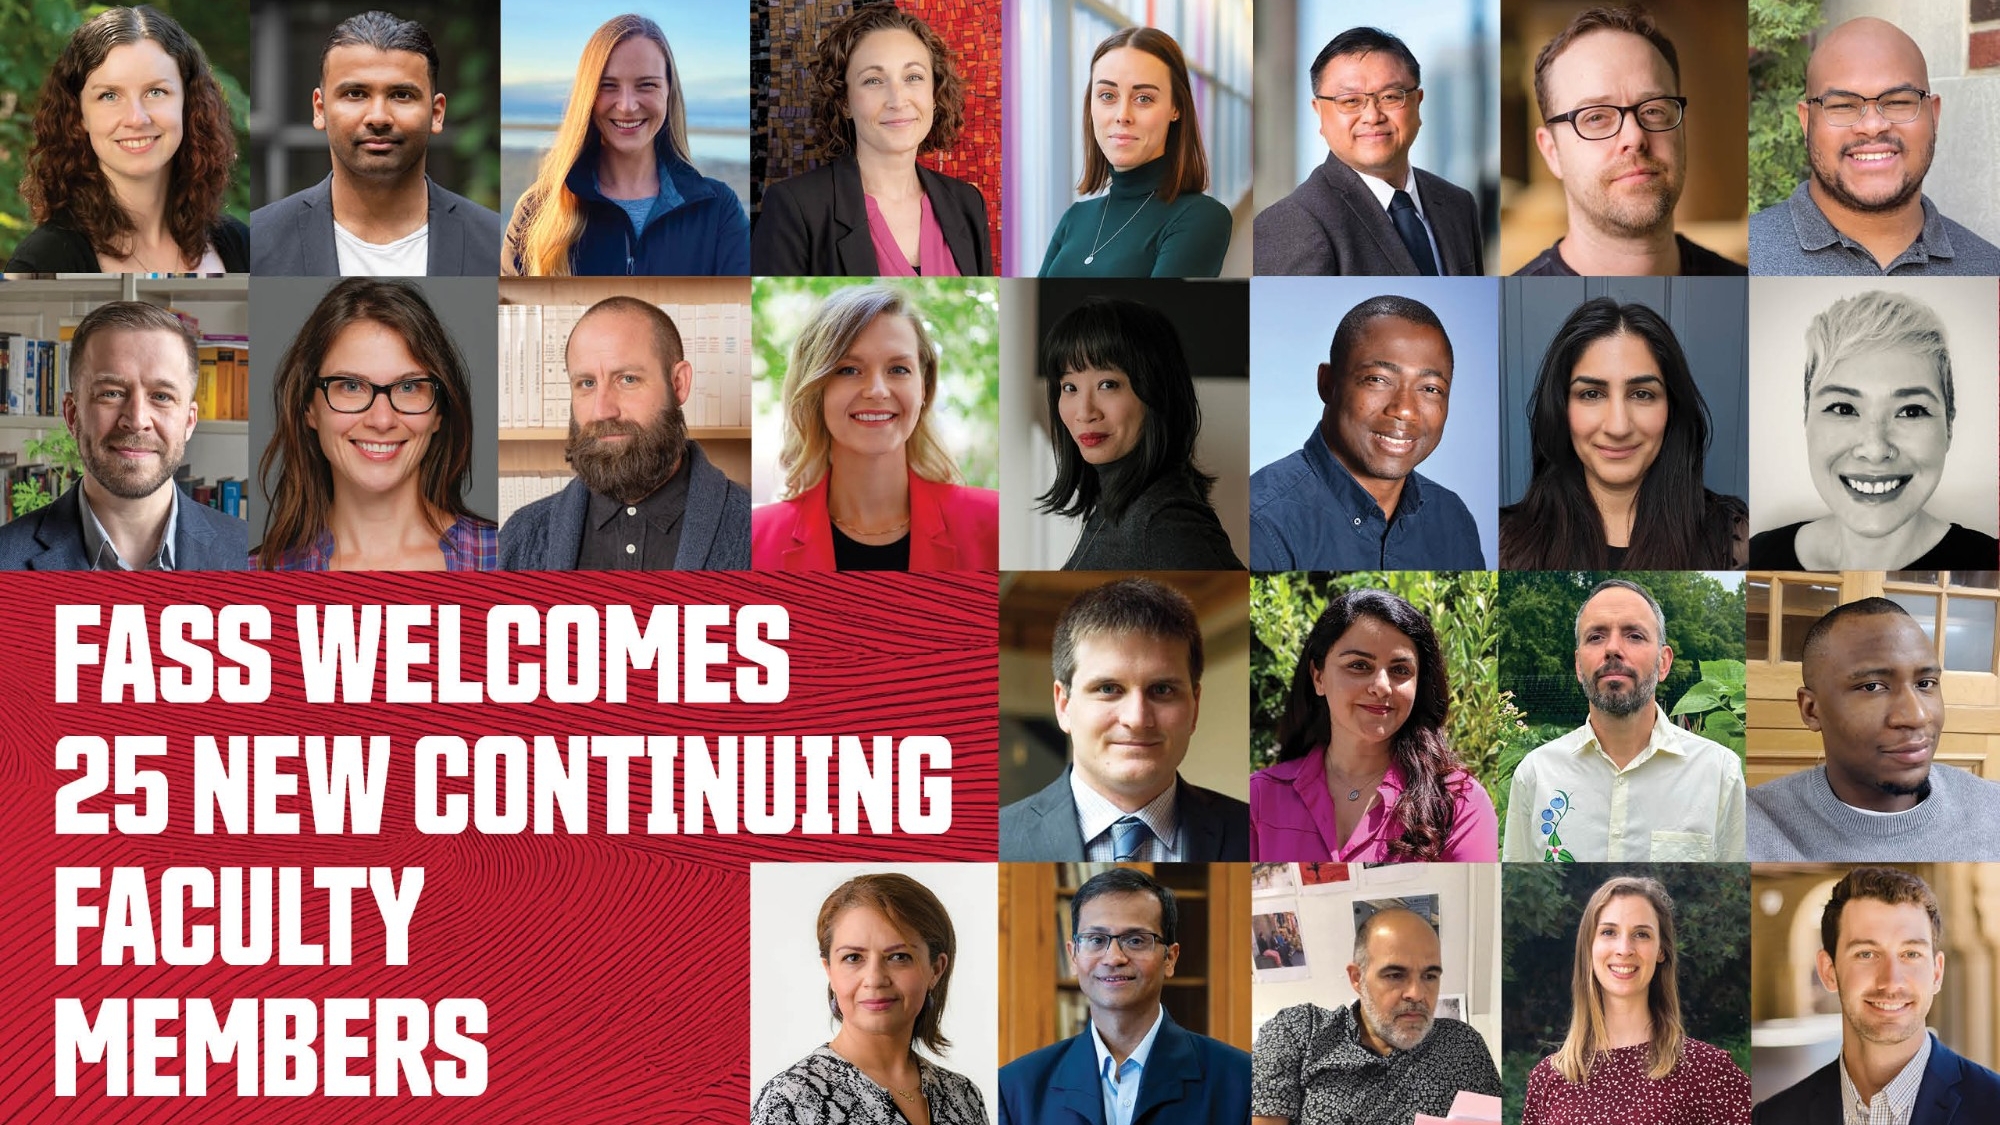 25 headshot photos in a grid layout, with "FASS welcomes 25 new continuing faculty members" in white text against a red background. 